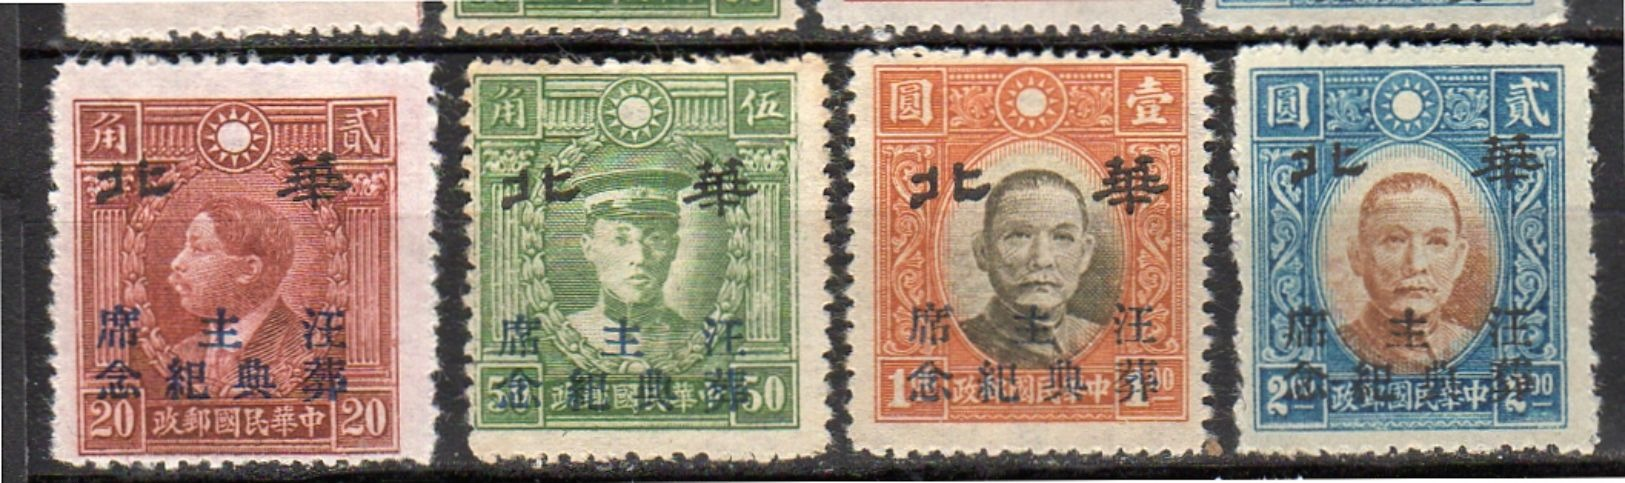 1944 Wang Ching-wei Von Nanking Chan# JN674 -7 Several Paper Types (issued Without Gum) Scarce & Undervalued (26c) - 1941-45 China Dela Norte